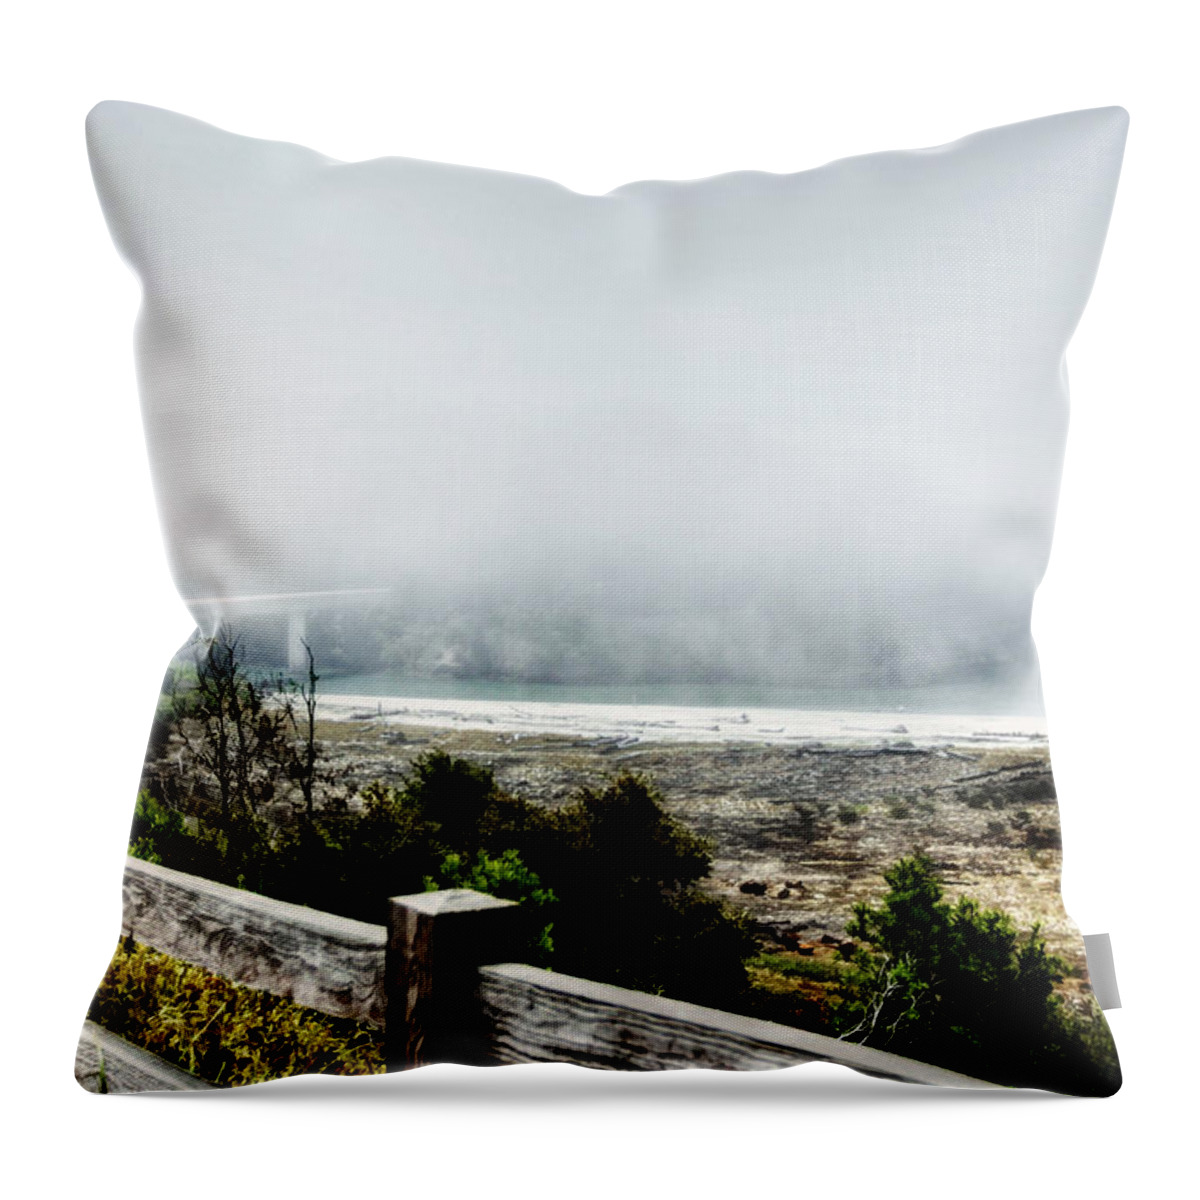 California Art Throw Pillow featuring the photograph Foggy Mendocino Morning by Kandy Hurley